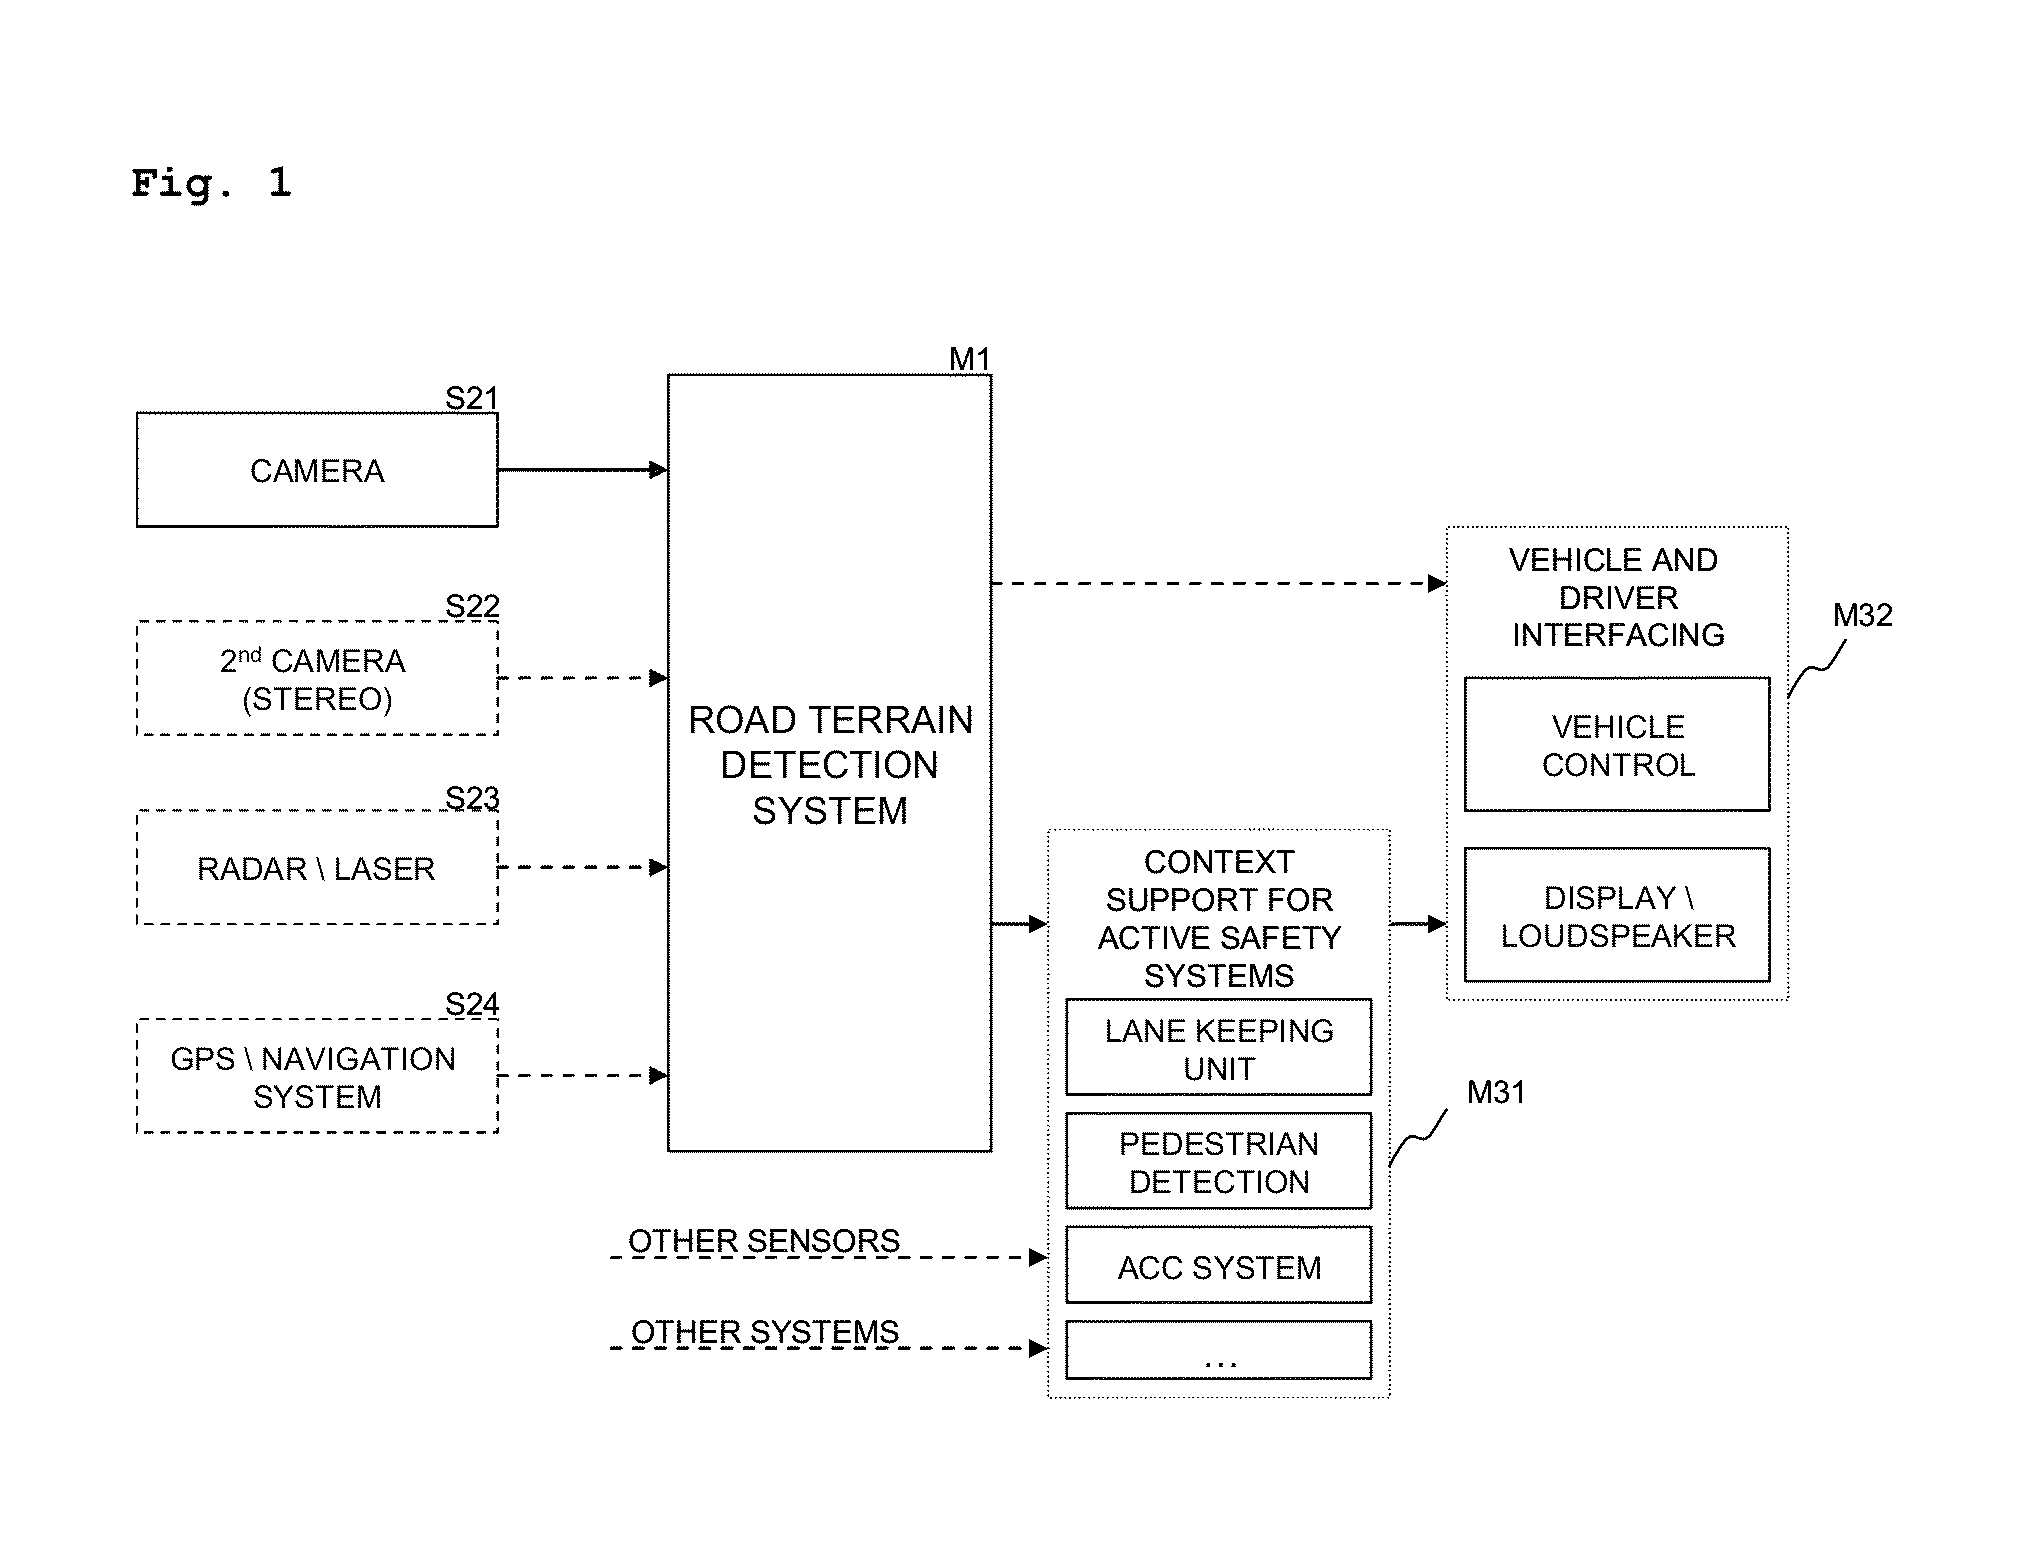 Road-terrain detection method and system for driver assistance systems